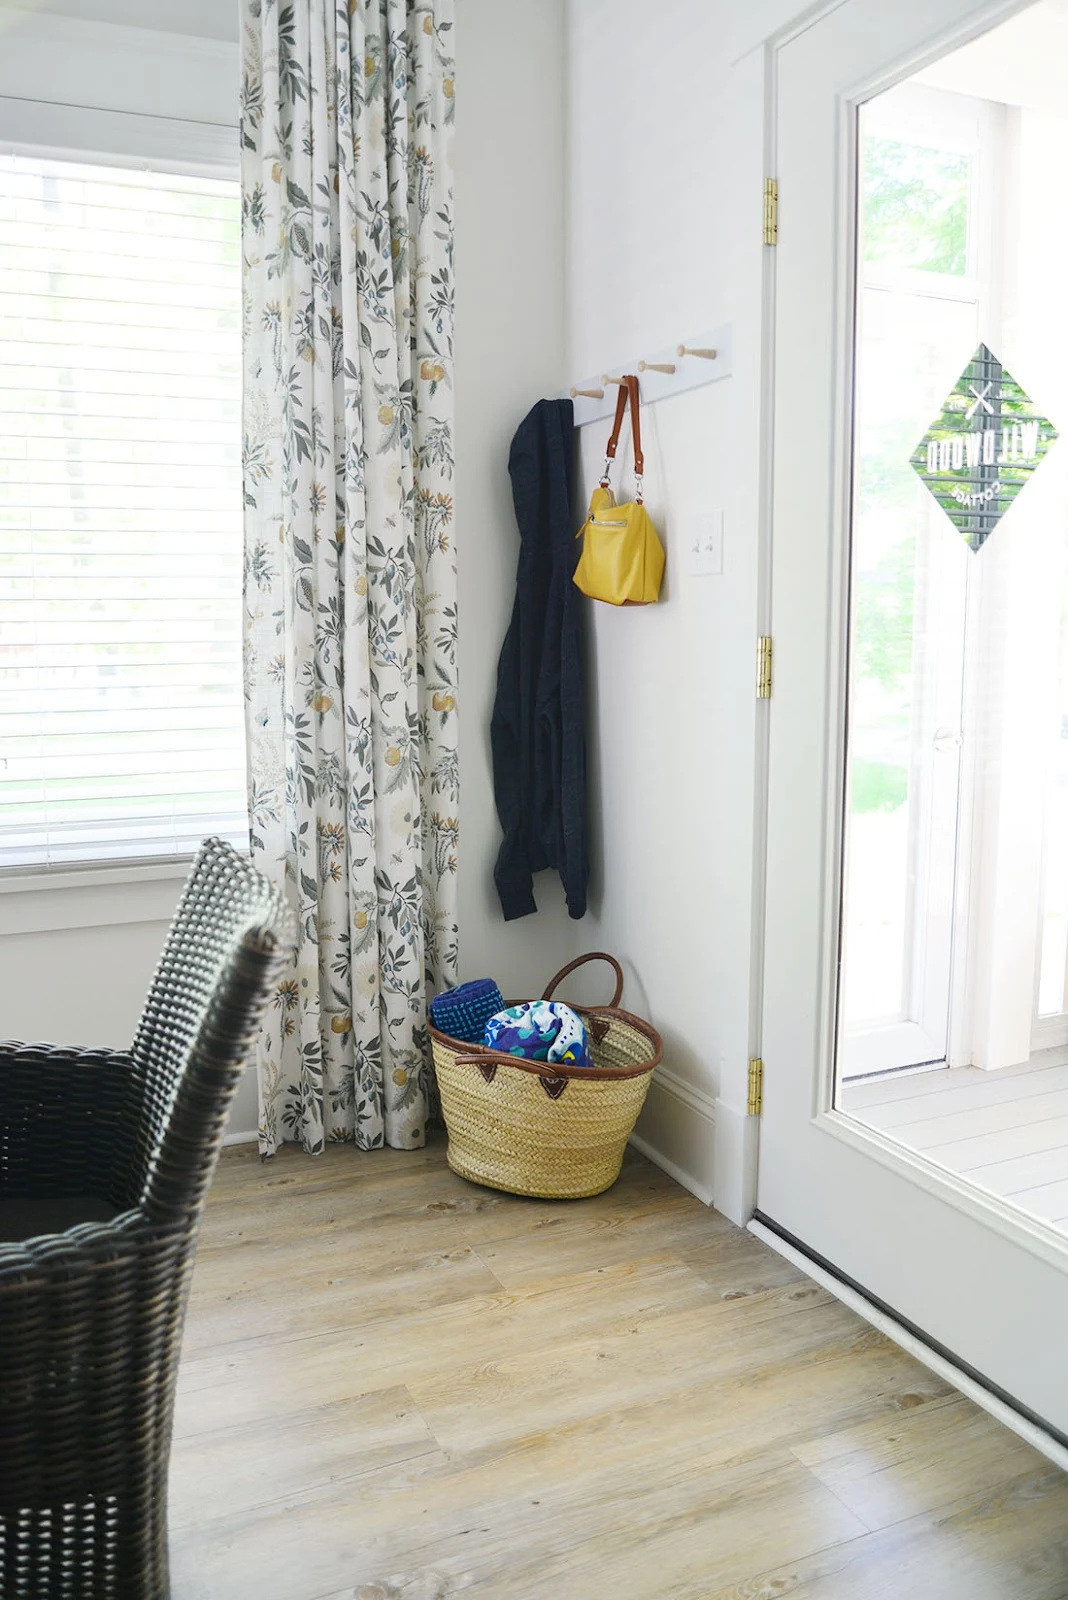 diy shaker peg rail, woven market tote basket with towels, fleur botanical la mer fabric, glass door with decal